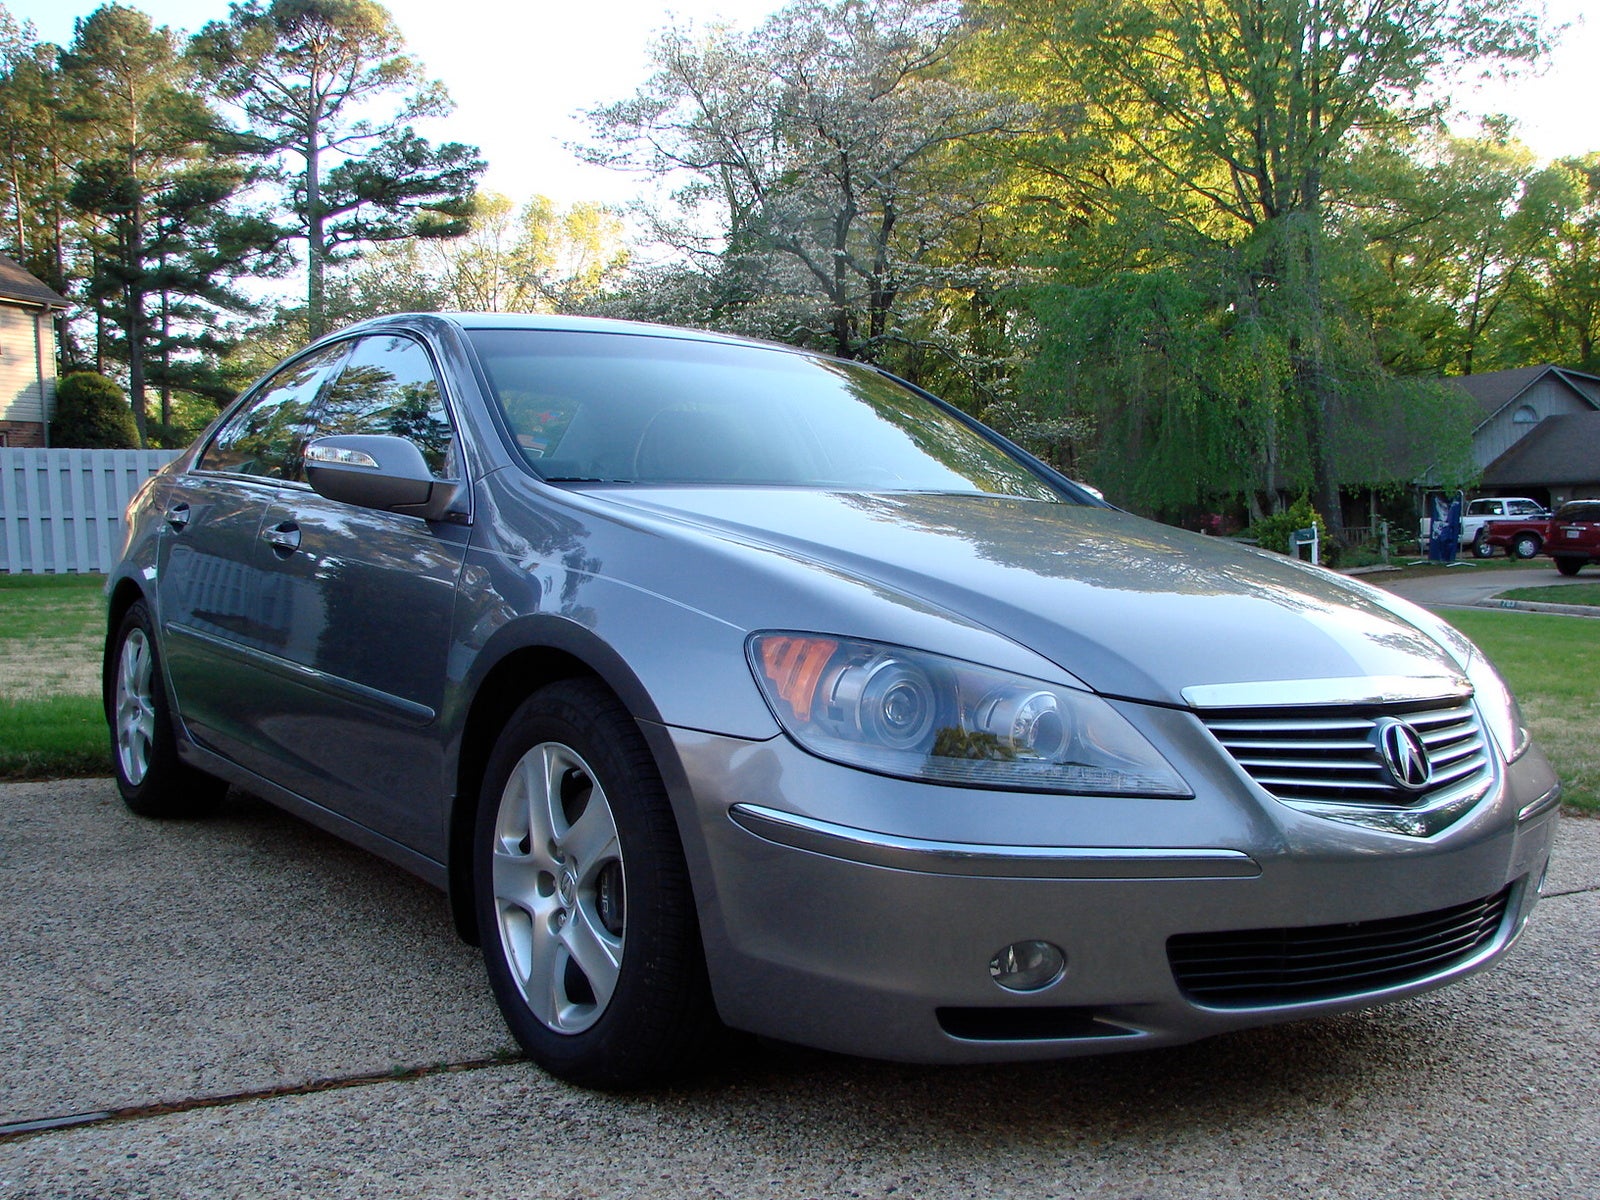 2006 Acura RL - Pictures - 2006 Acura RL 3.5L AWD w/Navi ...